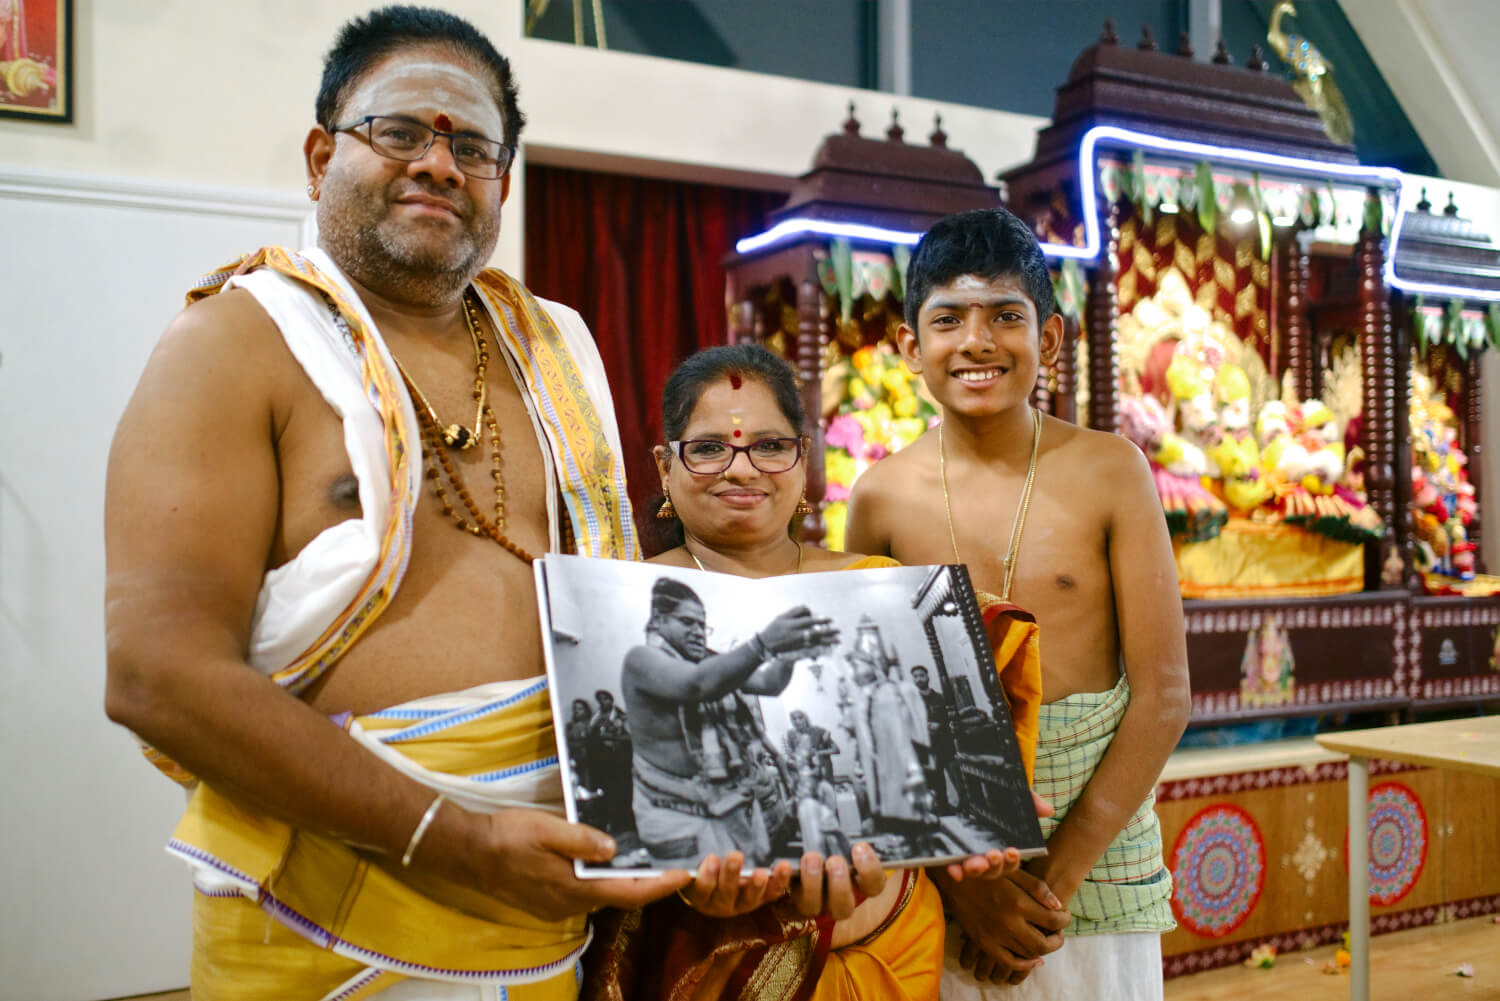 - by Sagar Kharecha, a special one-off collection of images from Foundation Stone was gifted to the community at the Temple.